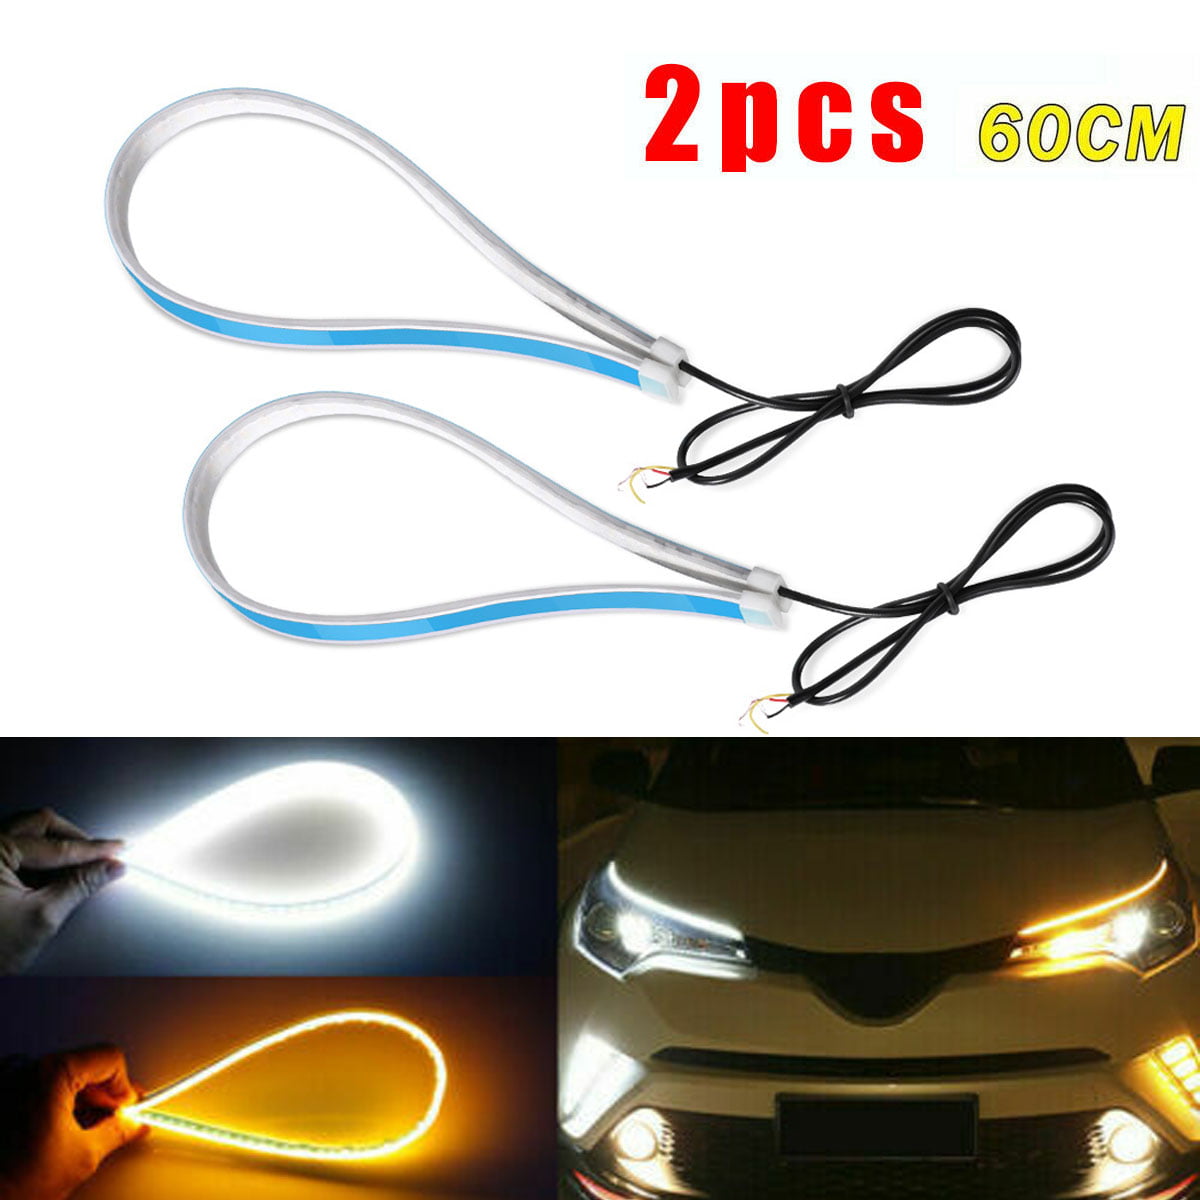 2Pcs Red 60CM Soft Guide Car Motorcycle LED Strip Light Lamp DRL Light 60-red 